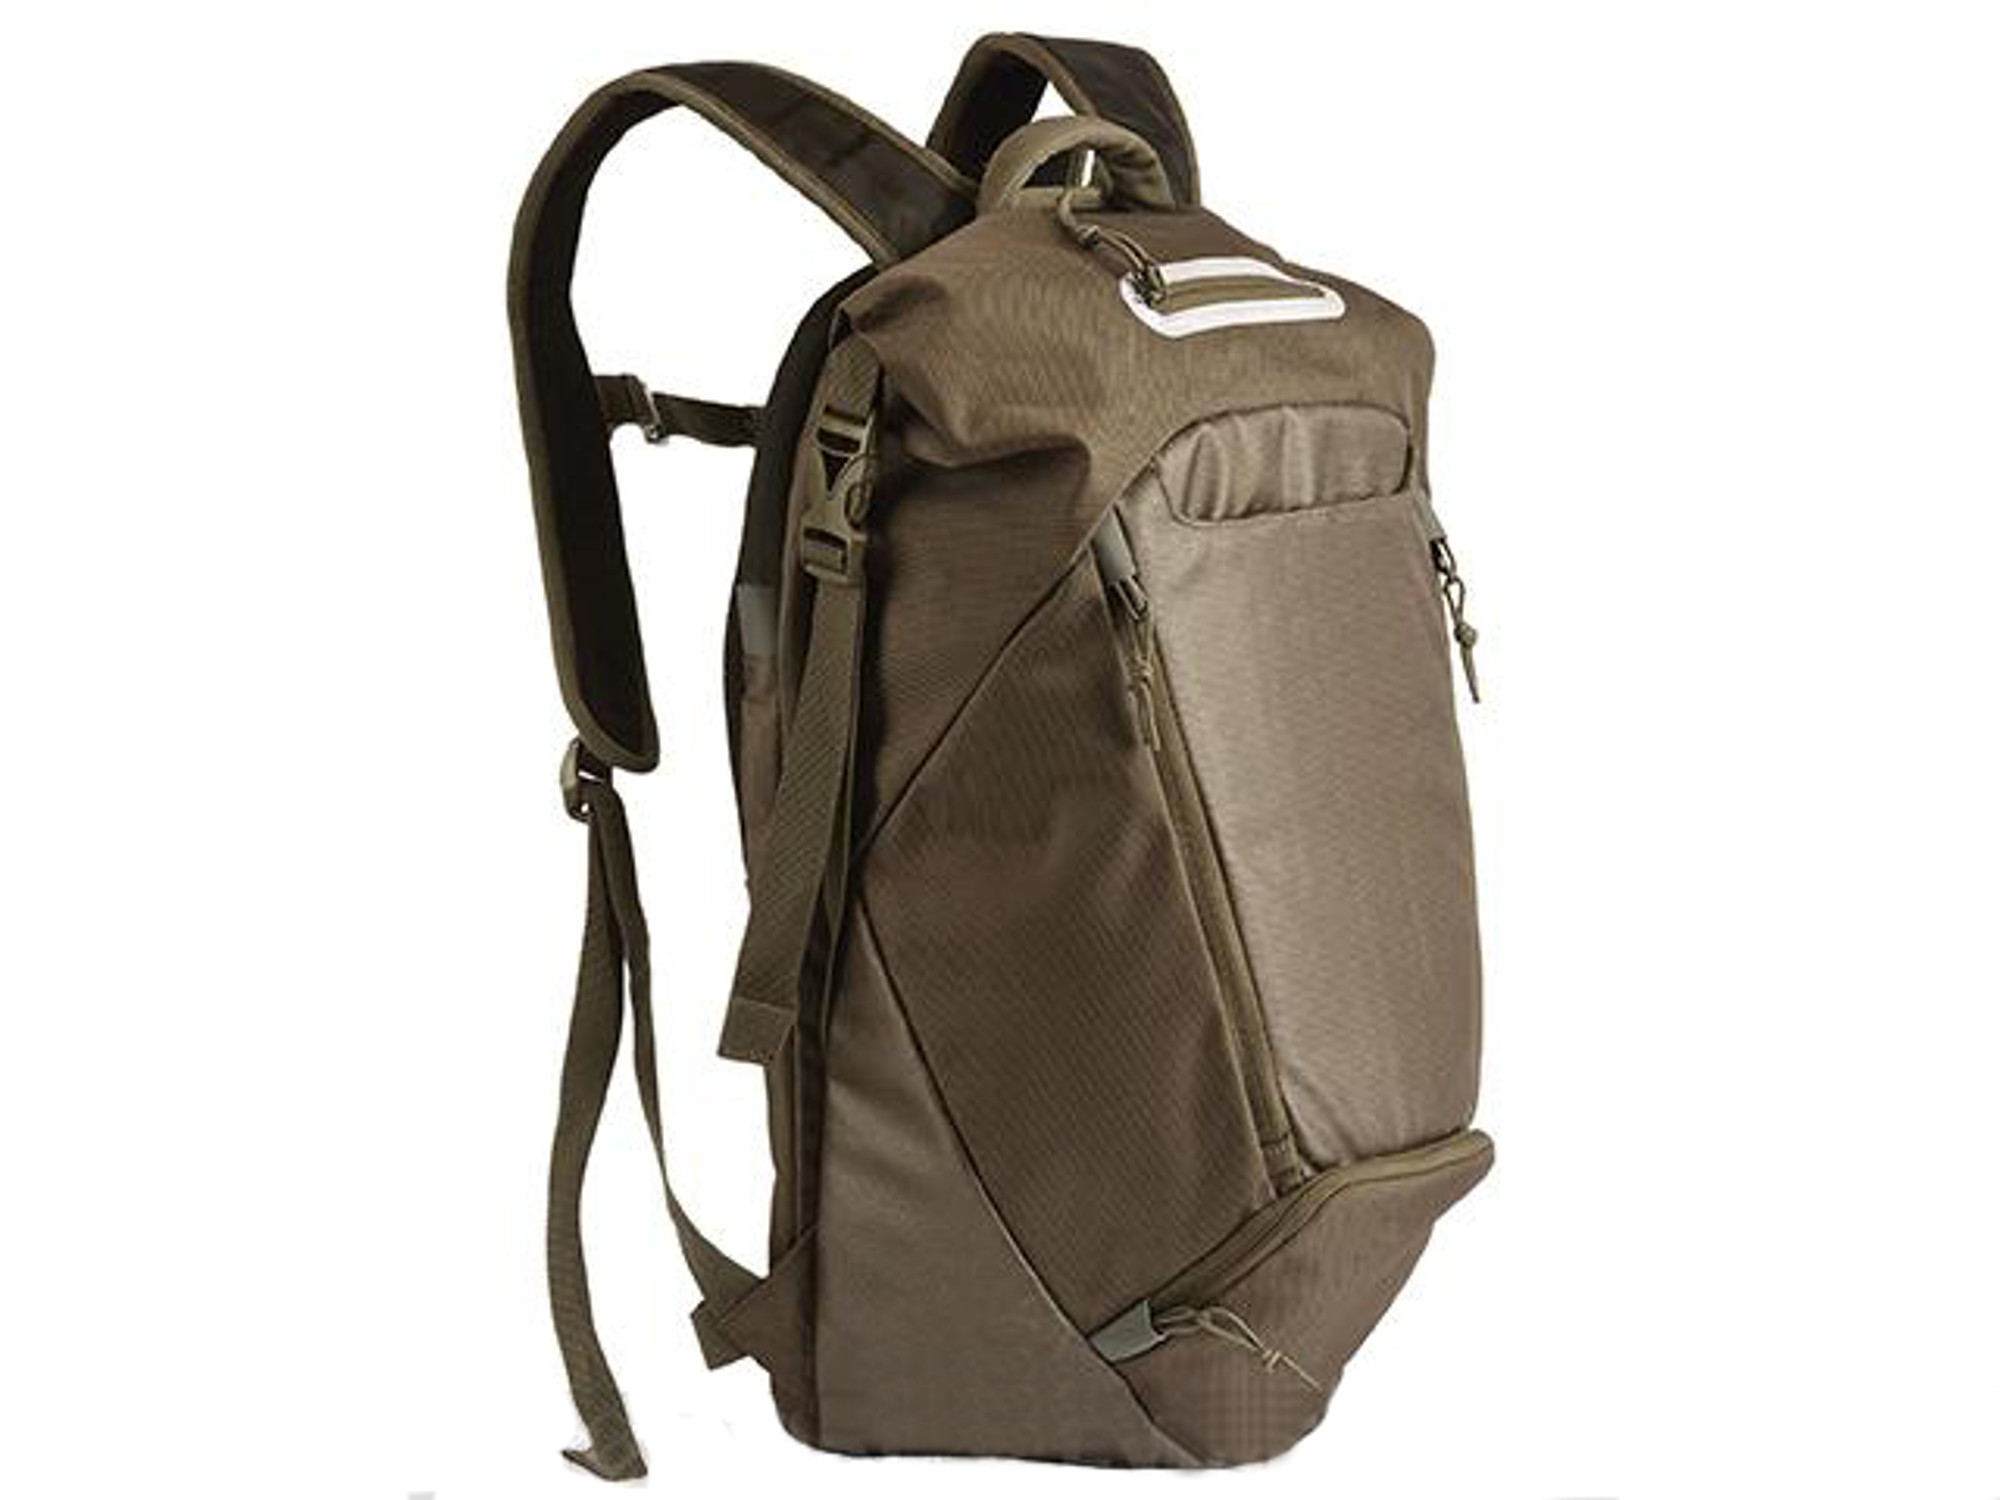 5.11 Tactical COVRT BoxPack Backpack Bag - Tundra